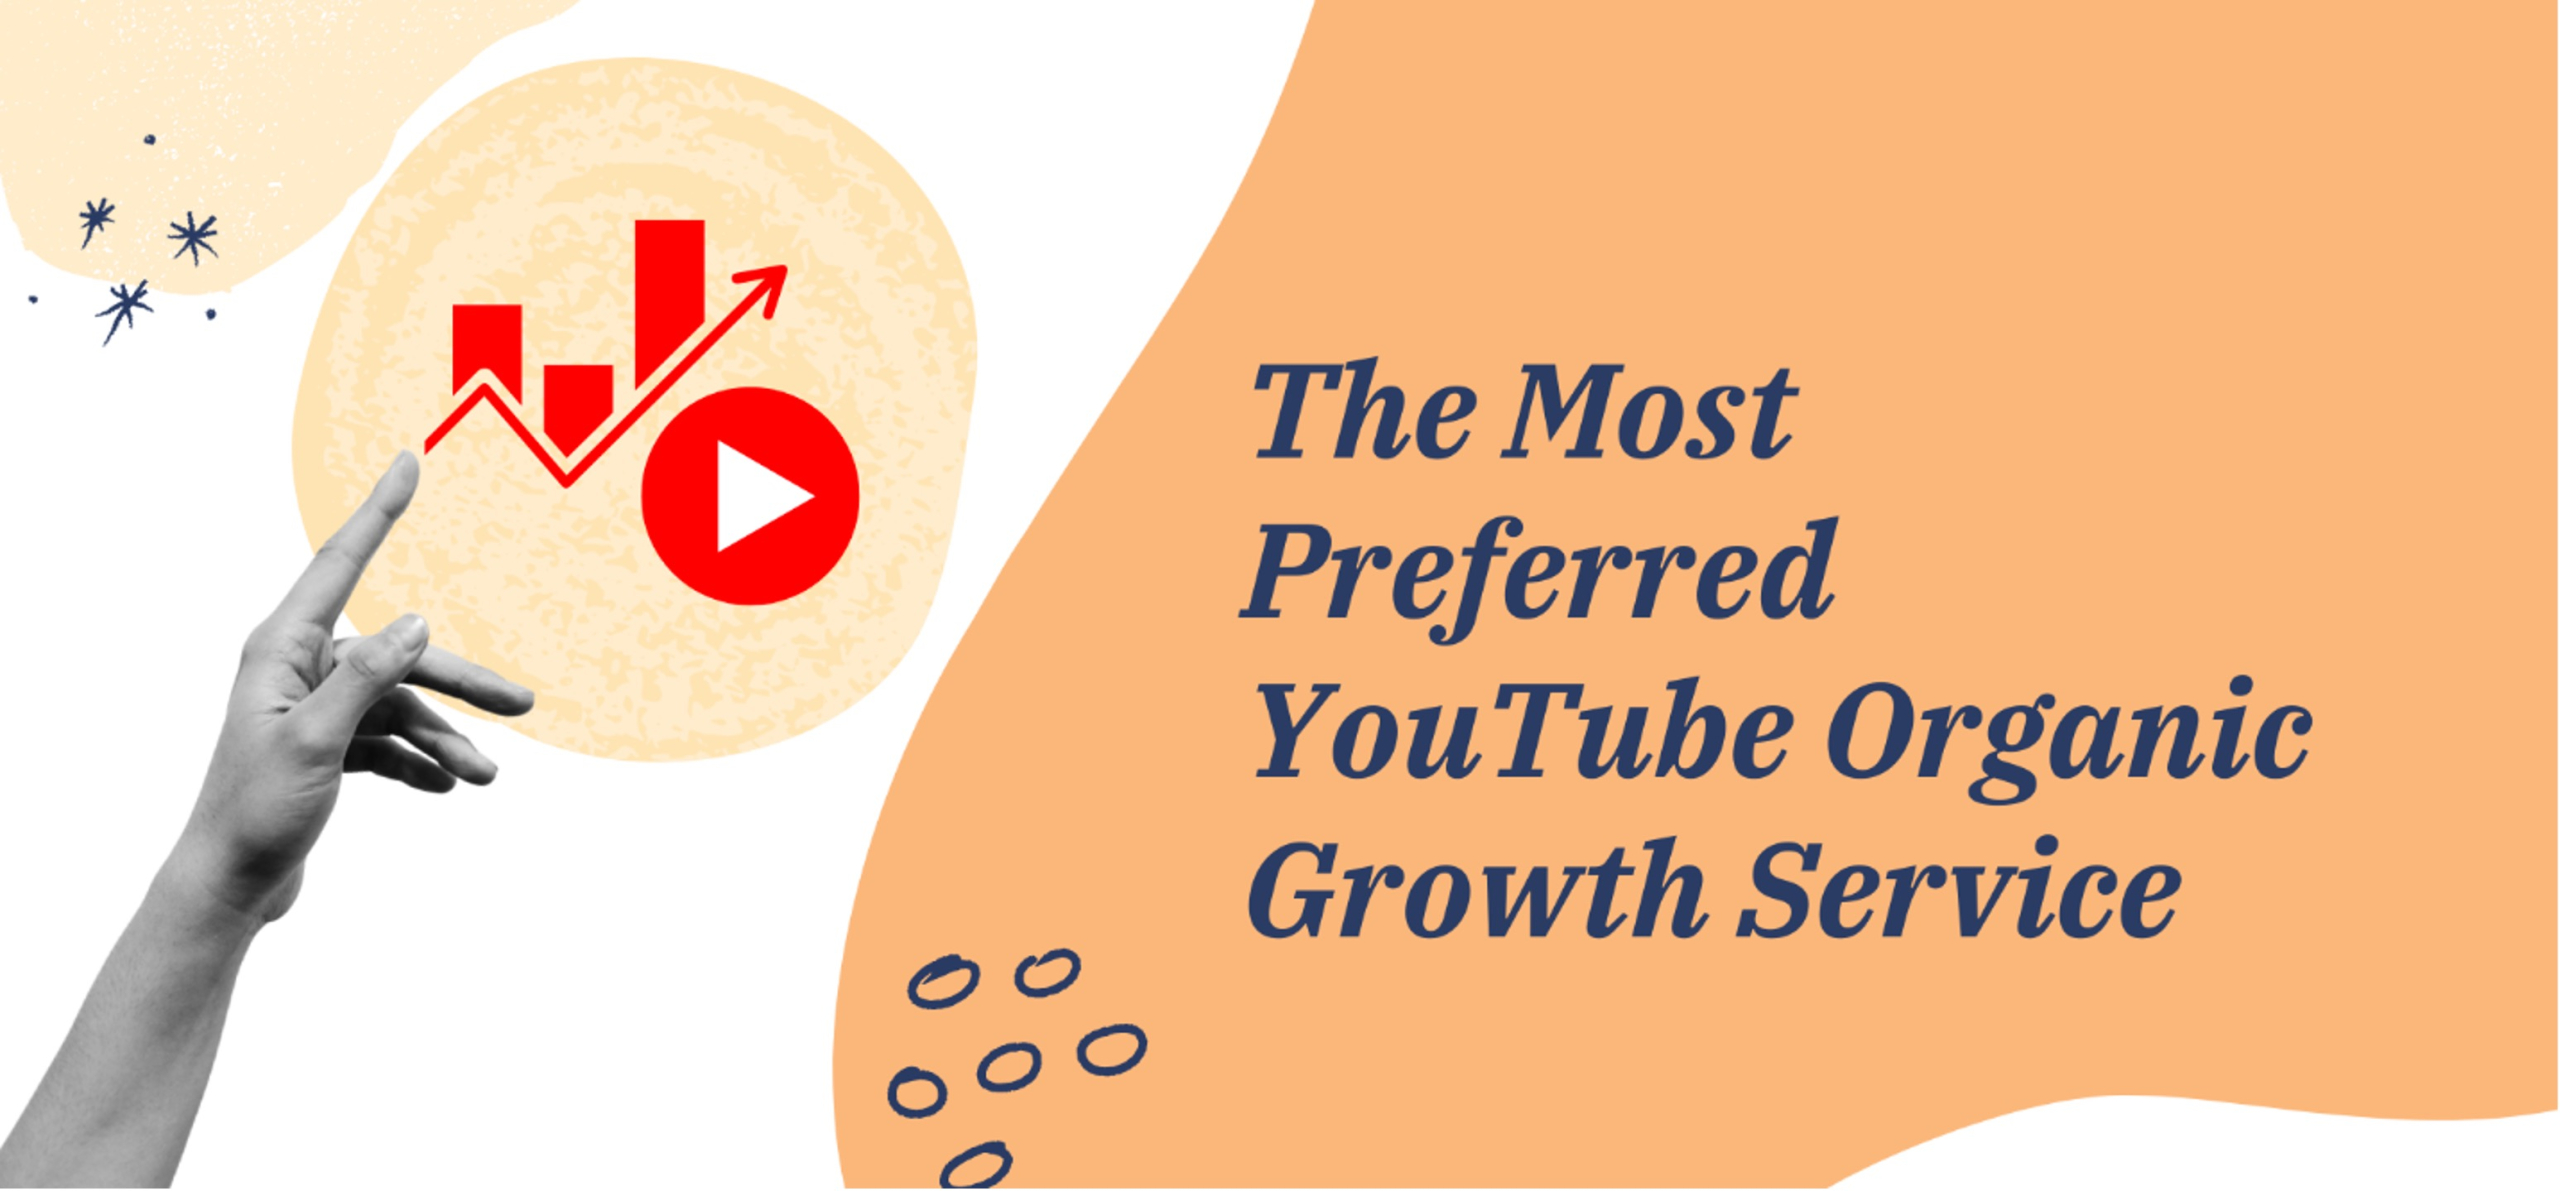 The Most Preferred YouTube Organic Growth Service - YouTube organic growth services, YouTube content strategy assistance, Views4You YouTube strategy, SEO optimization for YouTube videos, Monetization strategies for YouTube channels, Enhancing YouTube video visibility, Cost-effective YouTube growth, Collaborative opportunities for YouTubers, Authentic YouTube subscriber increase, AI-powered YouTube tools